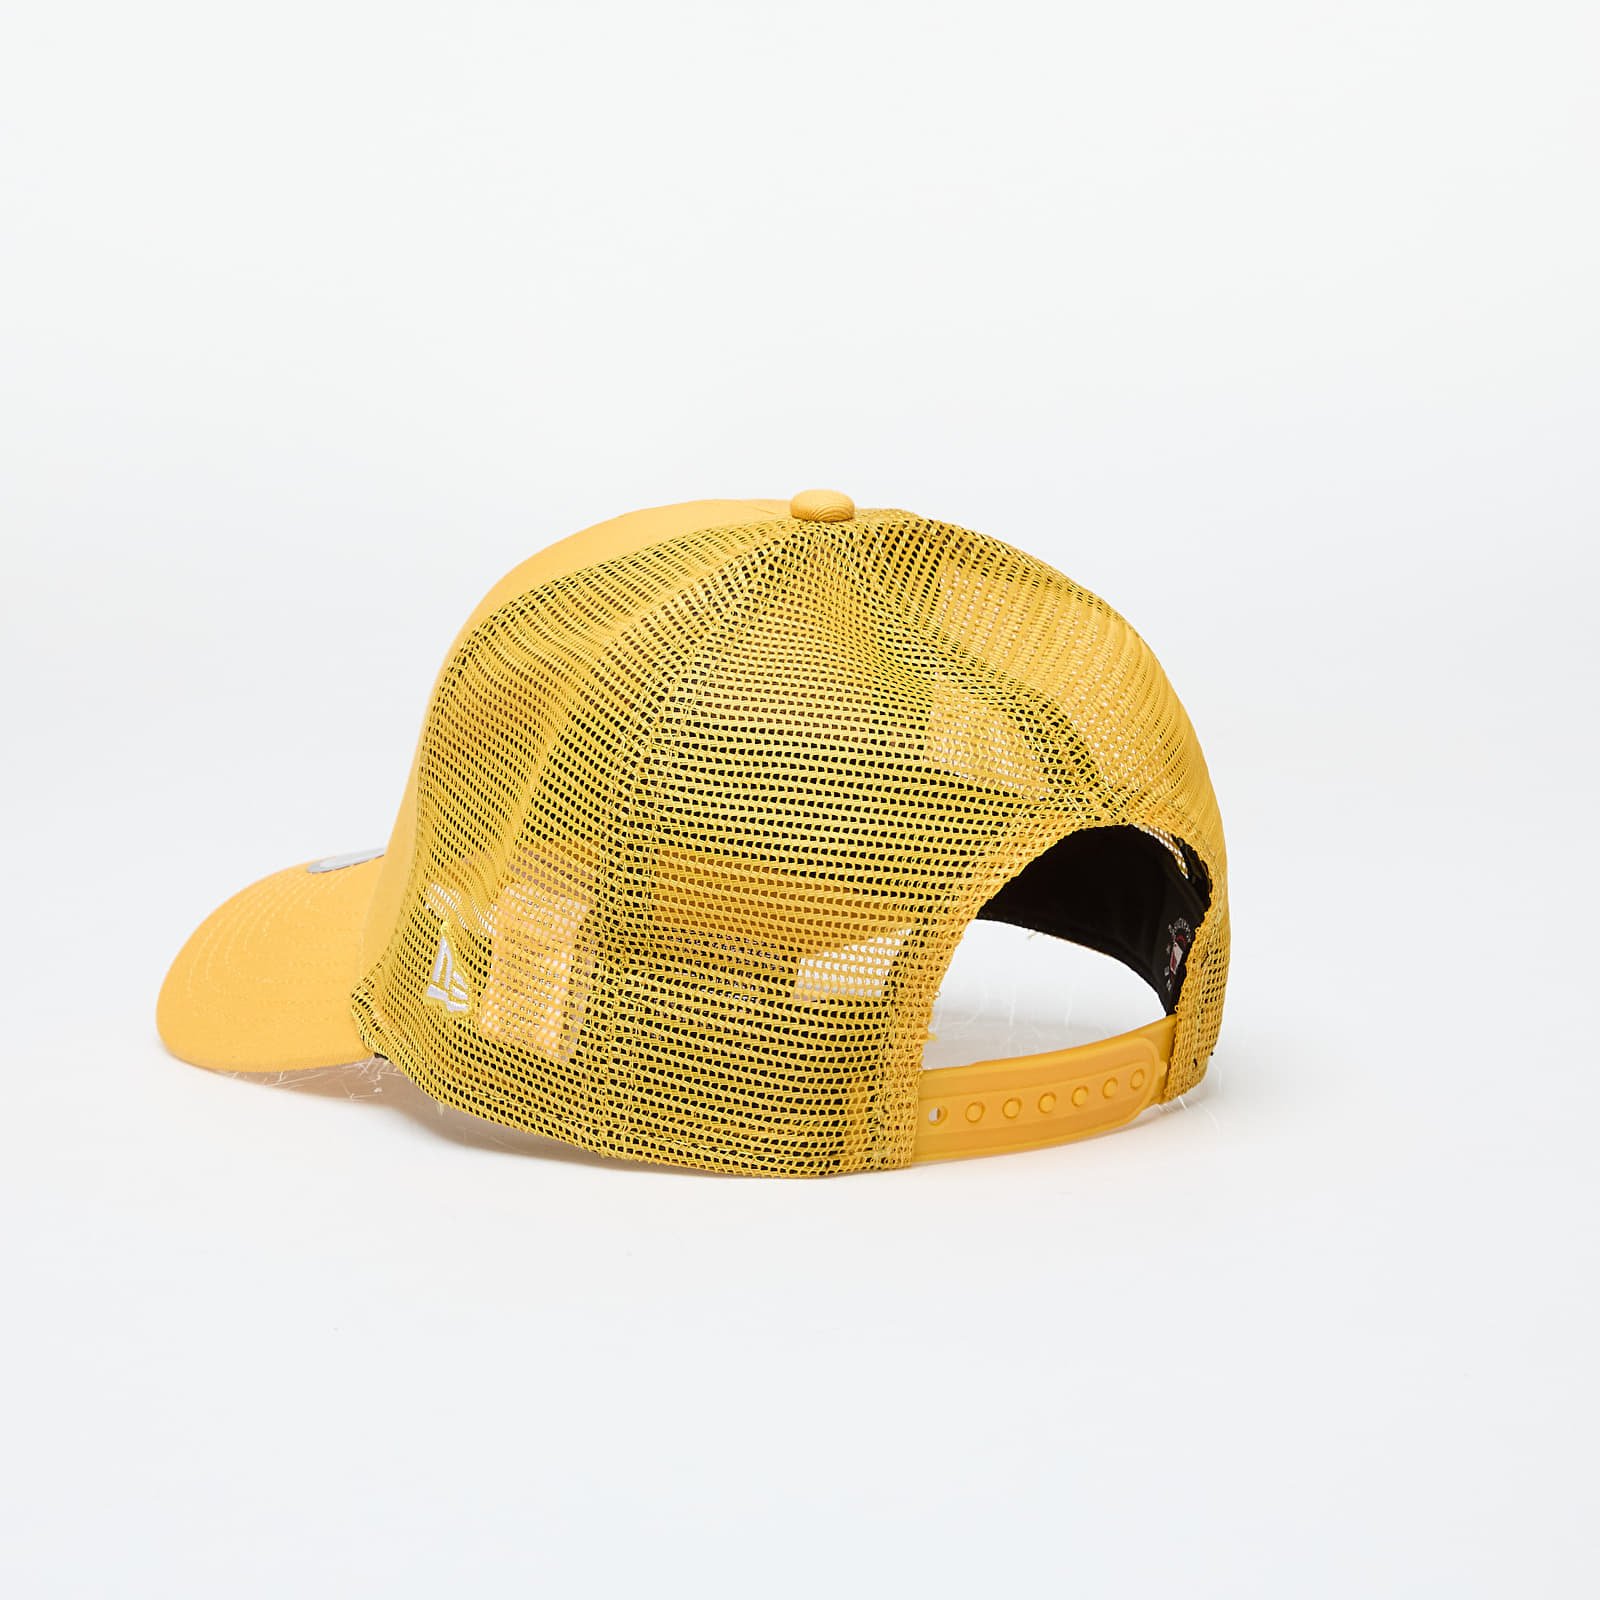 New York Yankees 9Forty Trucker Grilled Yellow/ White